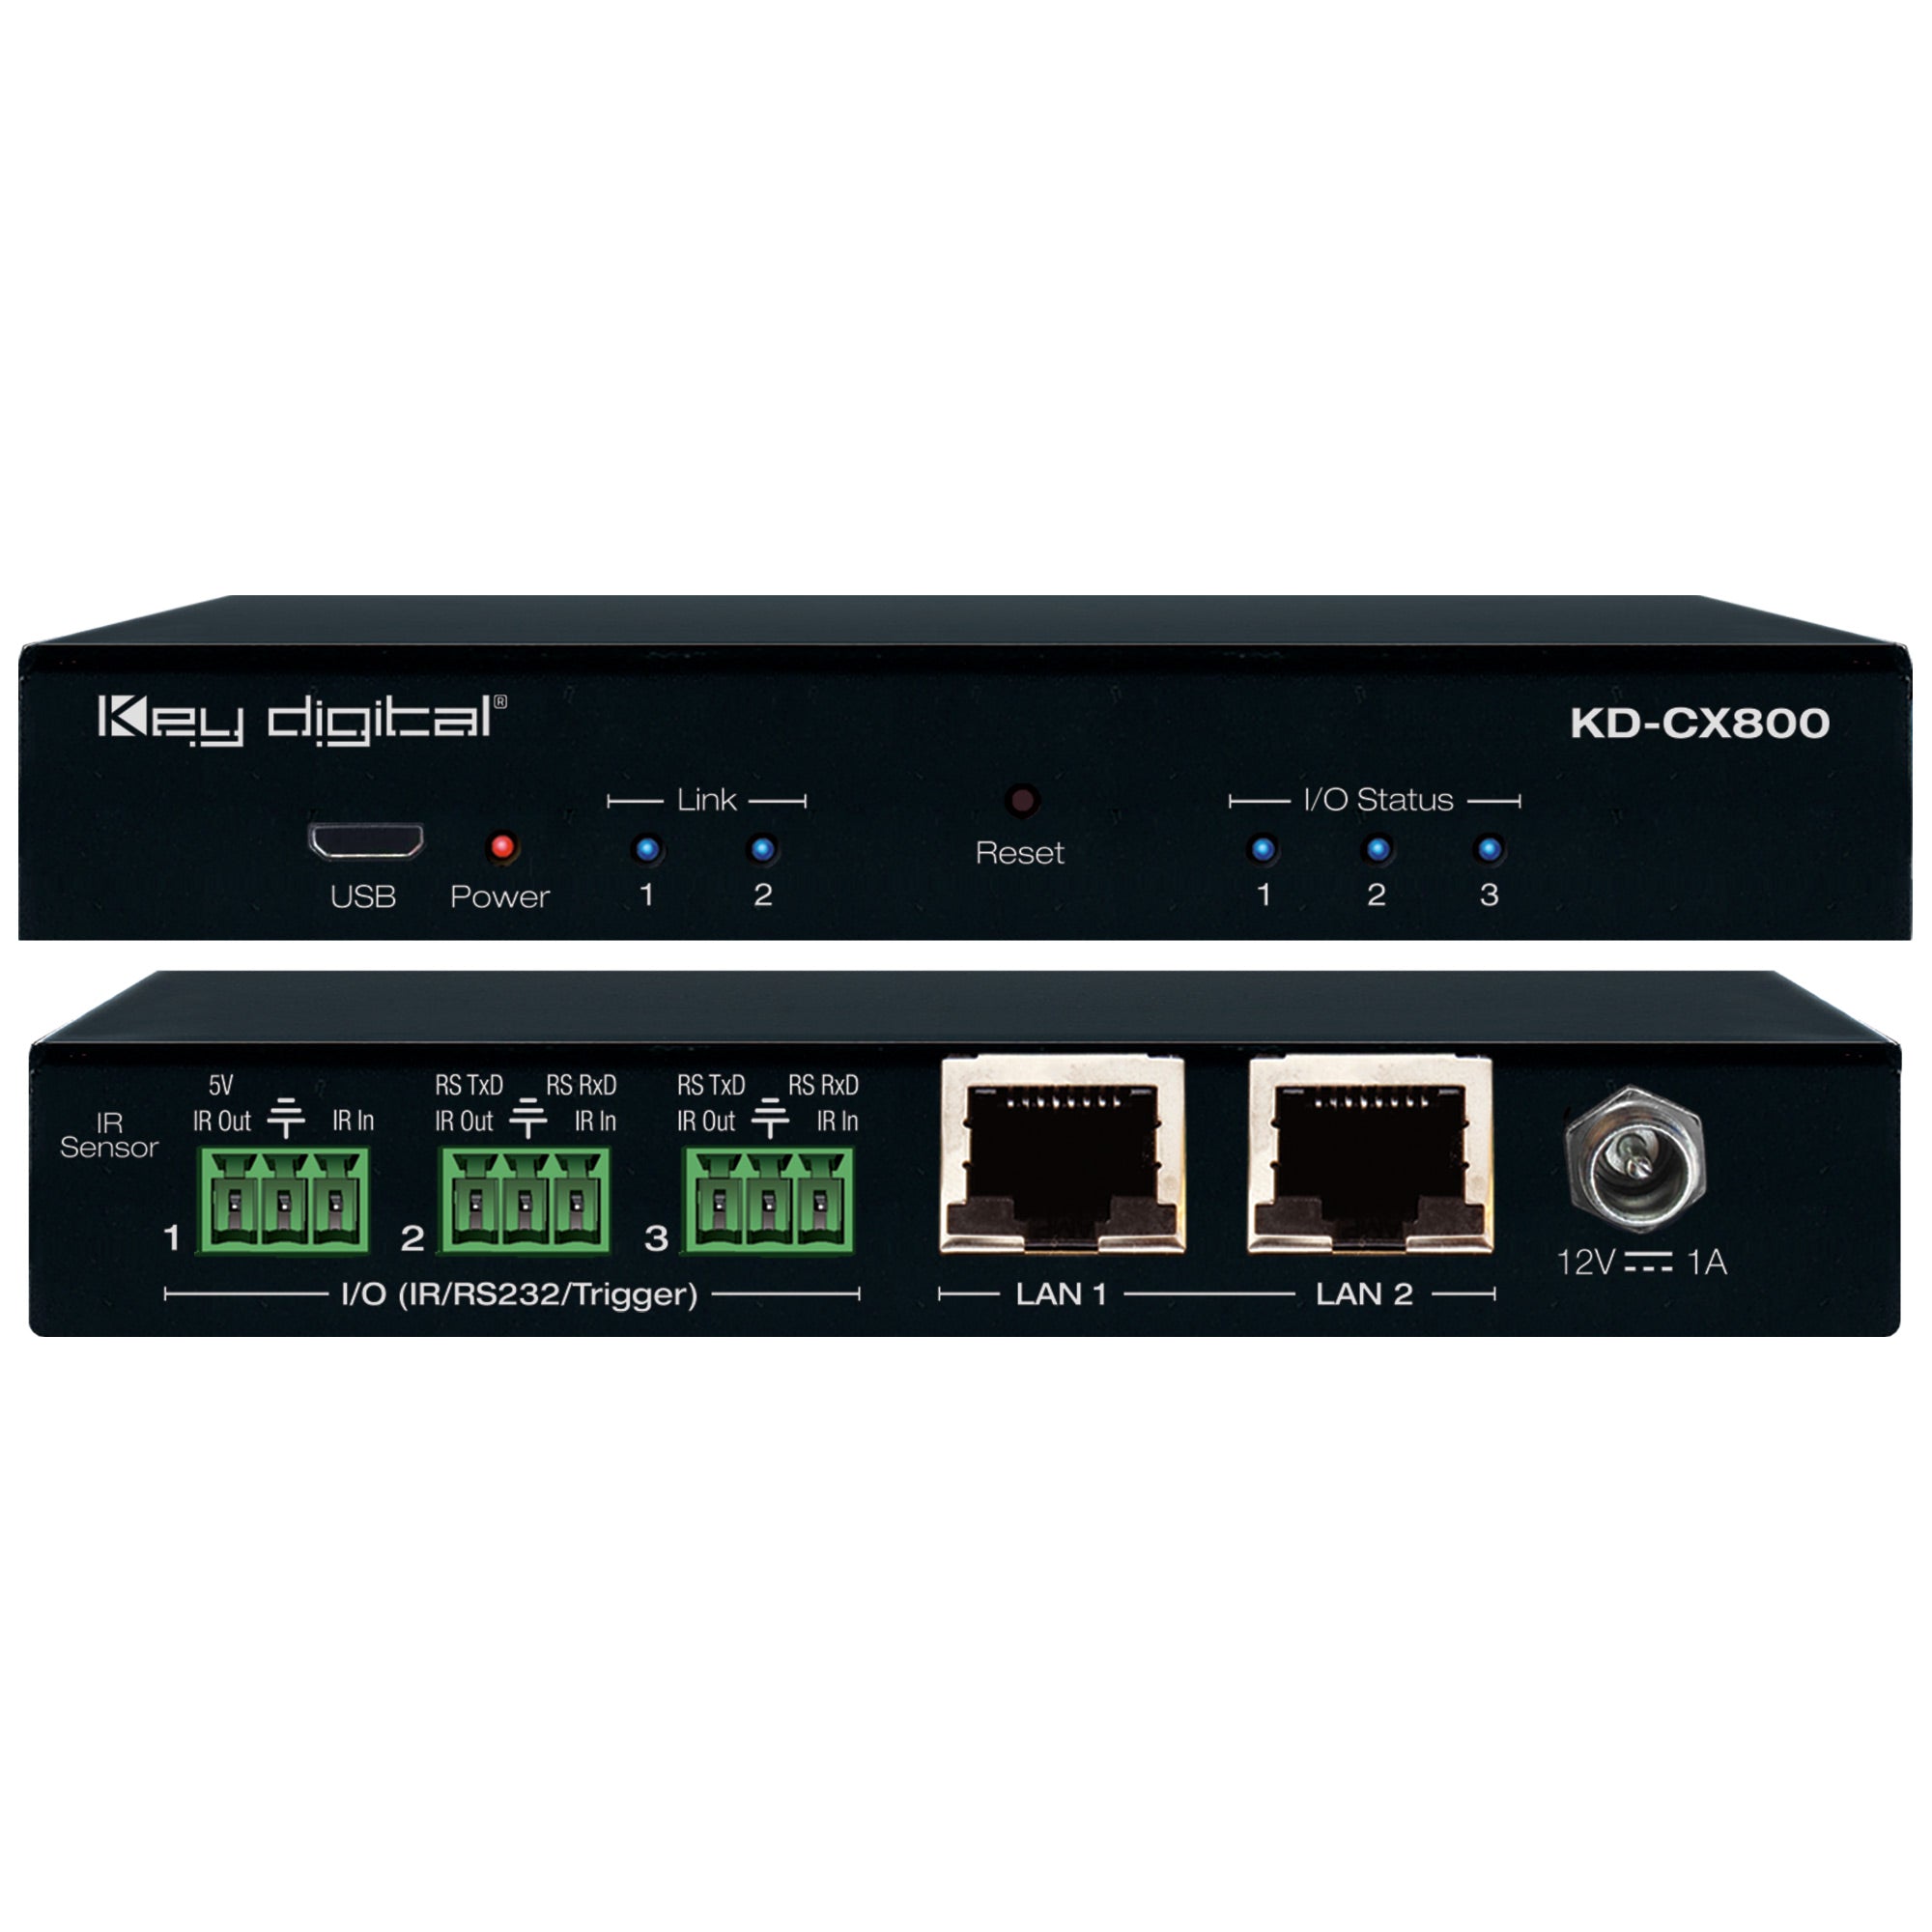 Key Digital Control Interface with IR & RS232 over IP Routing - KD-CX800